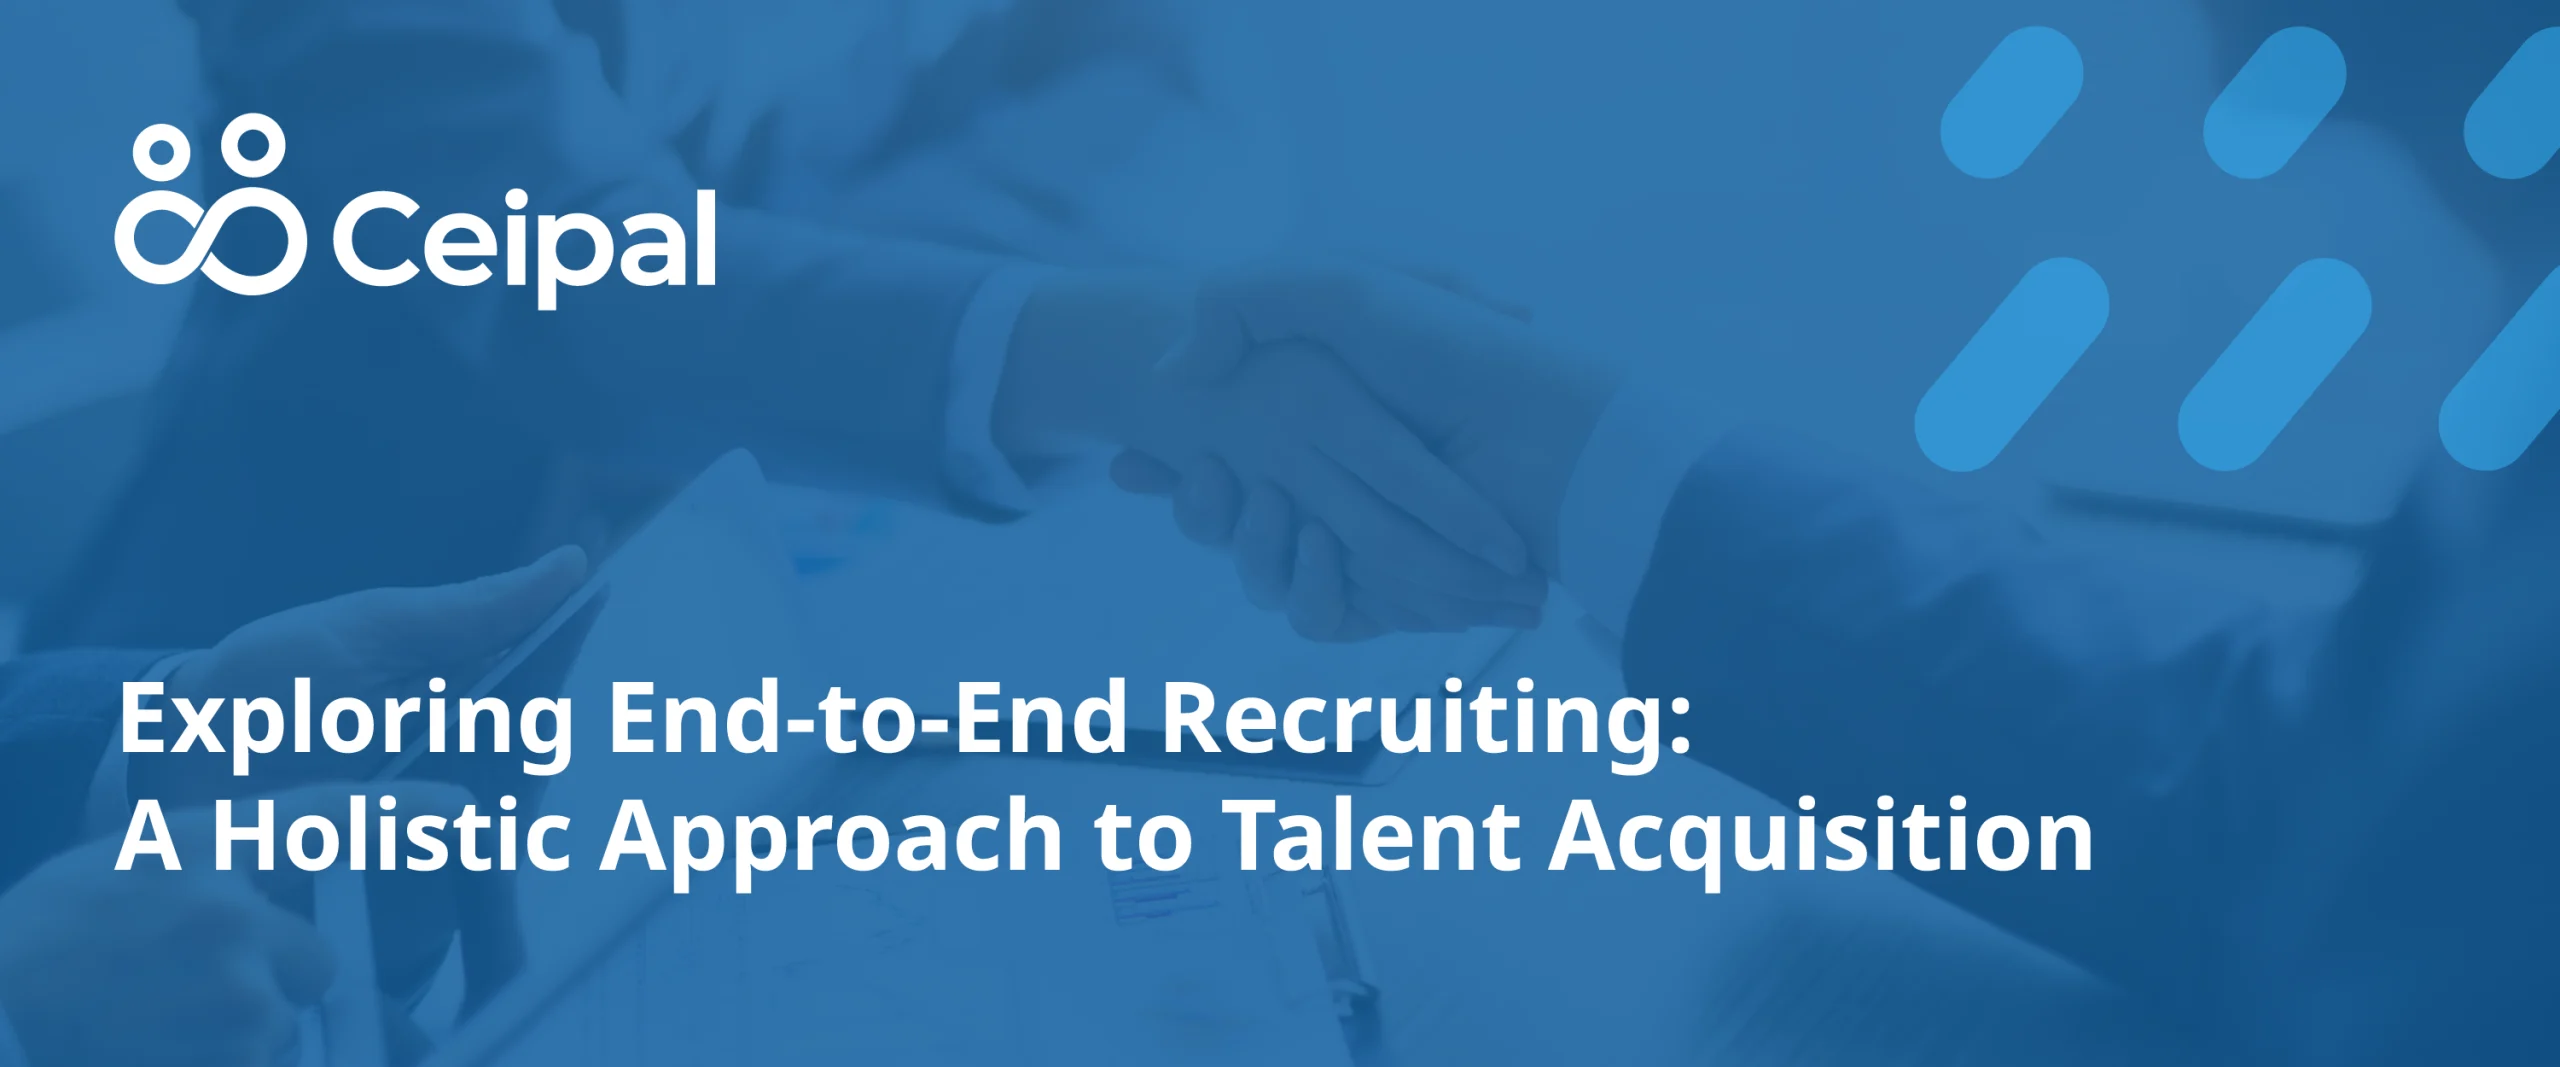 Exploring End-to-End Recruiting: A Holistic Approach to Talent Acquisition